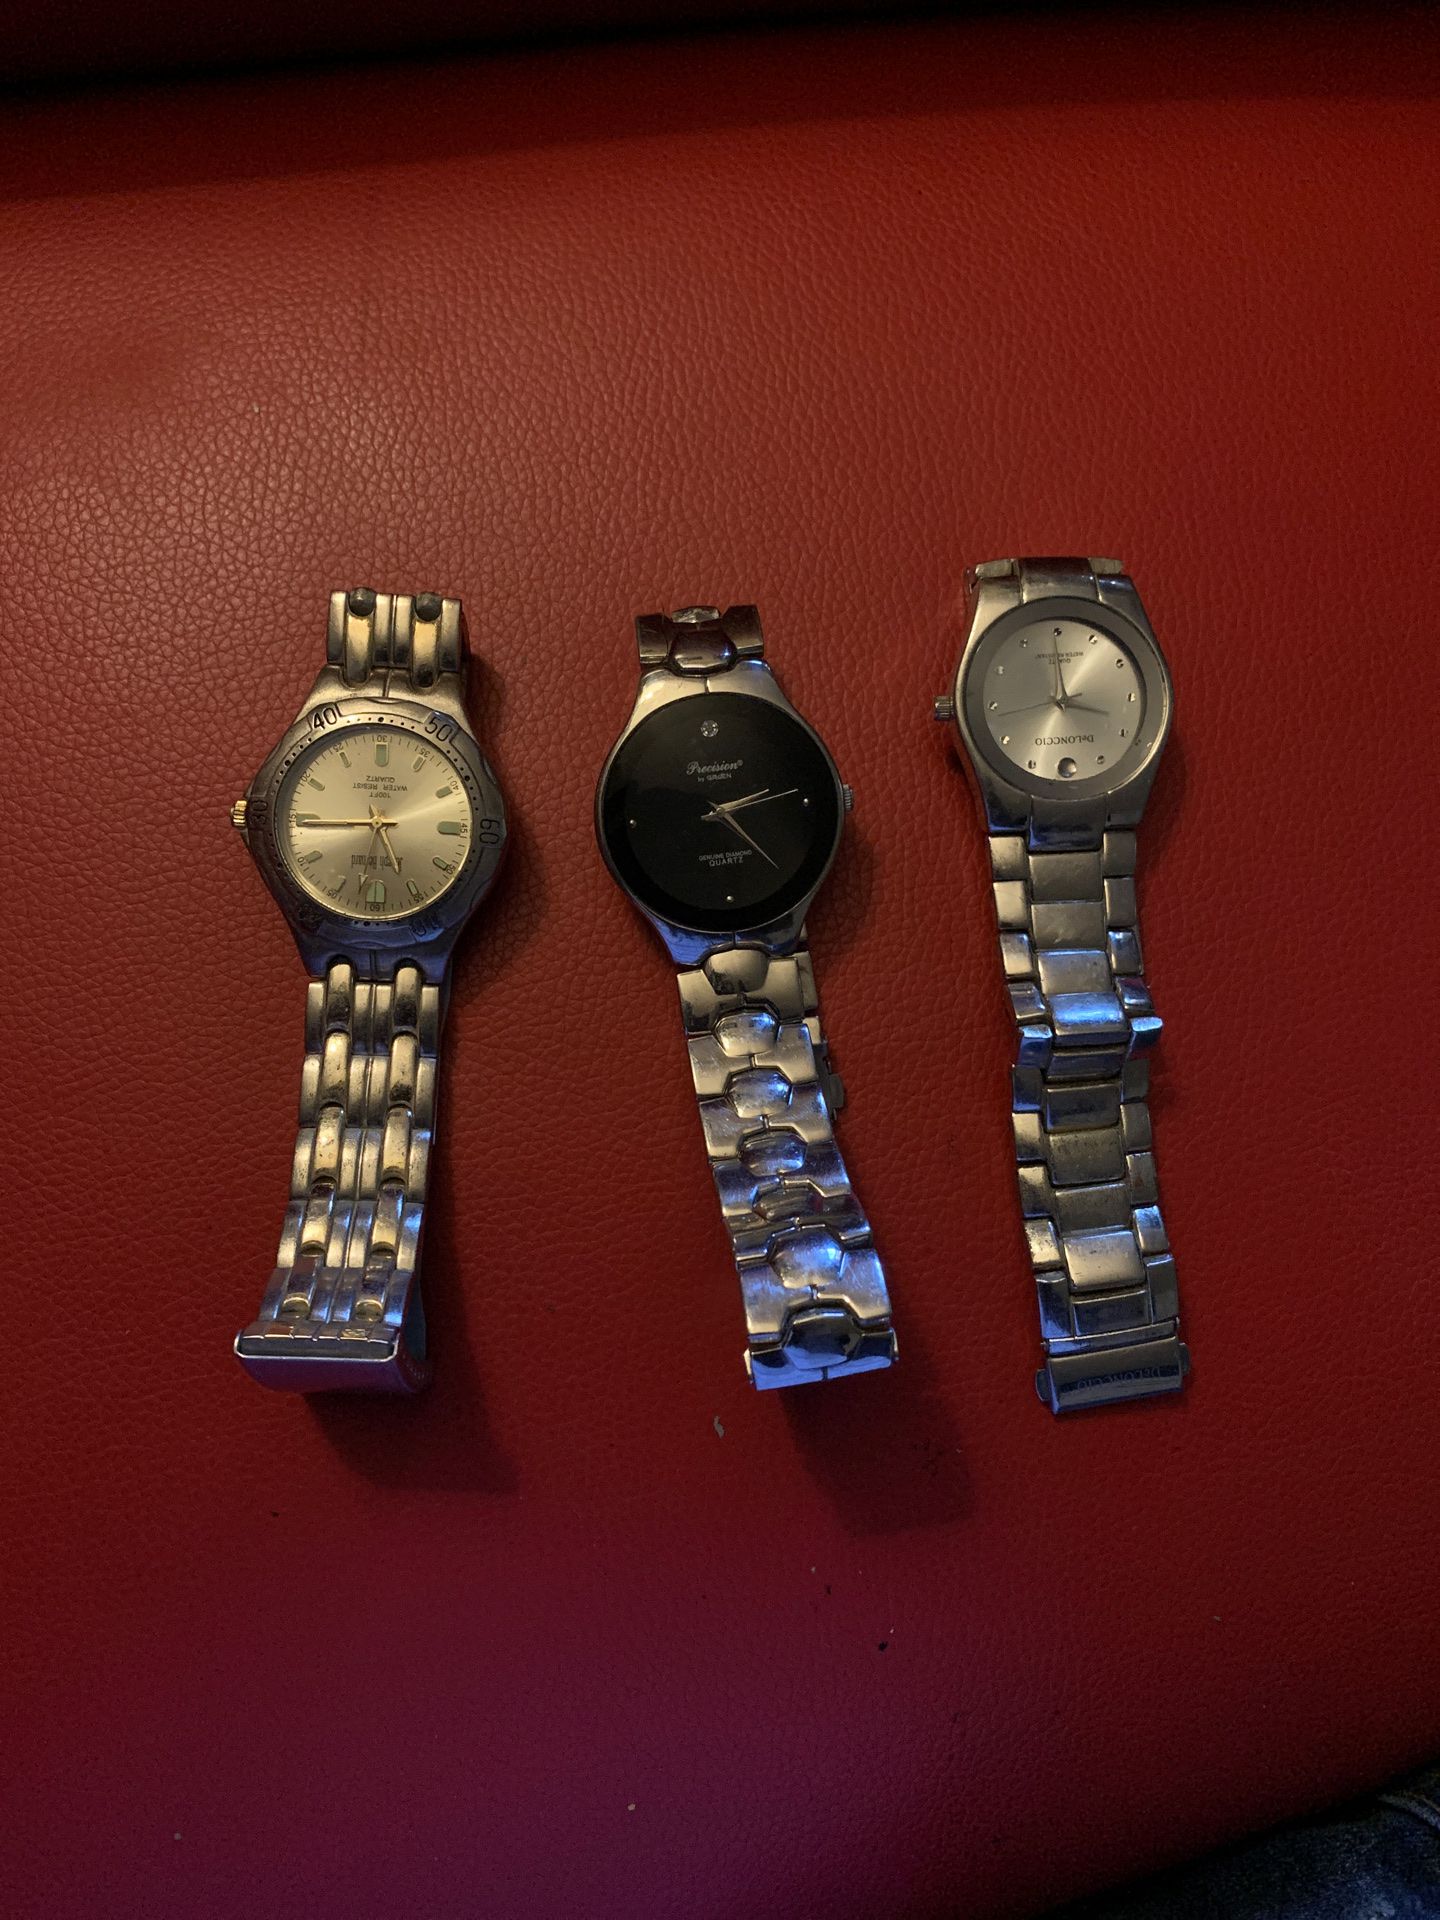 All three watches